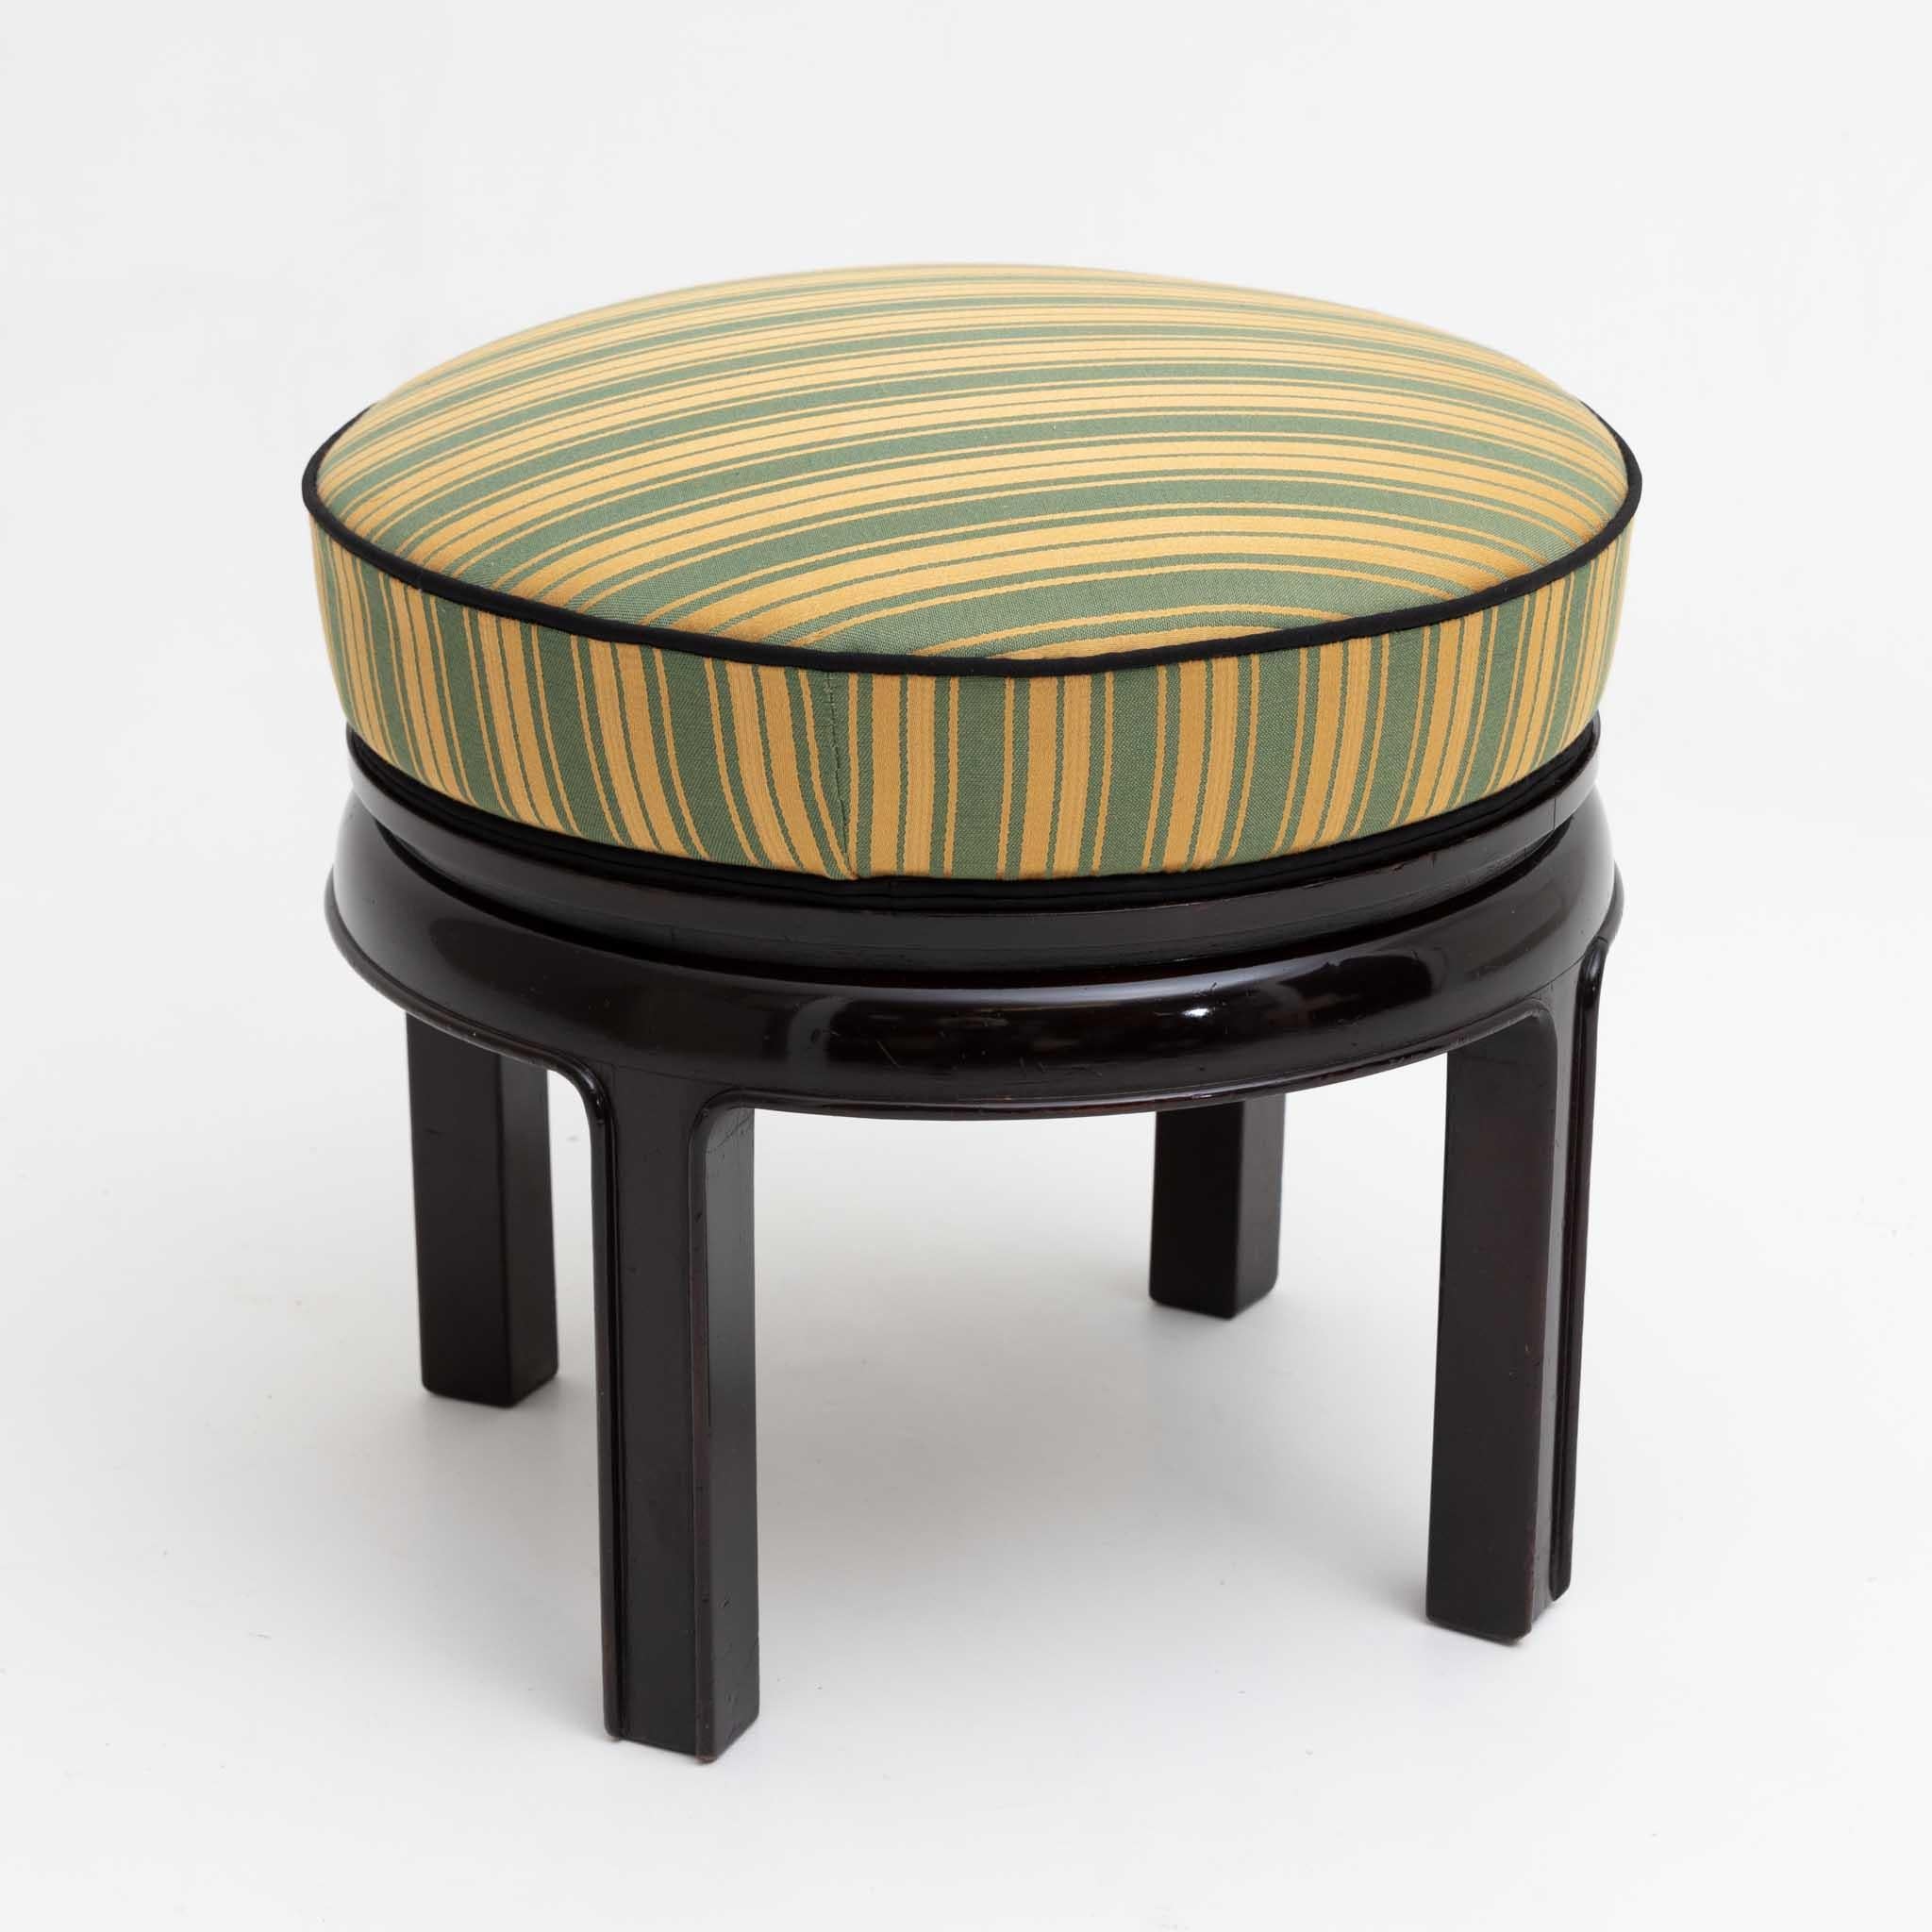 Art Deco stool with round upholstered seat and ebonised frame on four straight legs. The green and yellow striped cover is new and has been trimmed with black piping.